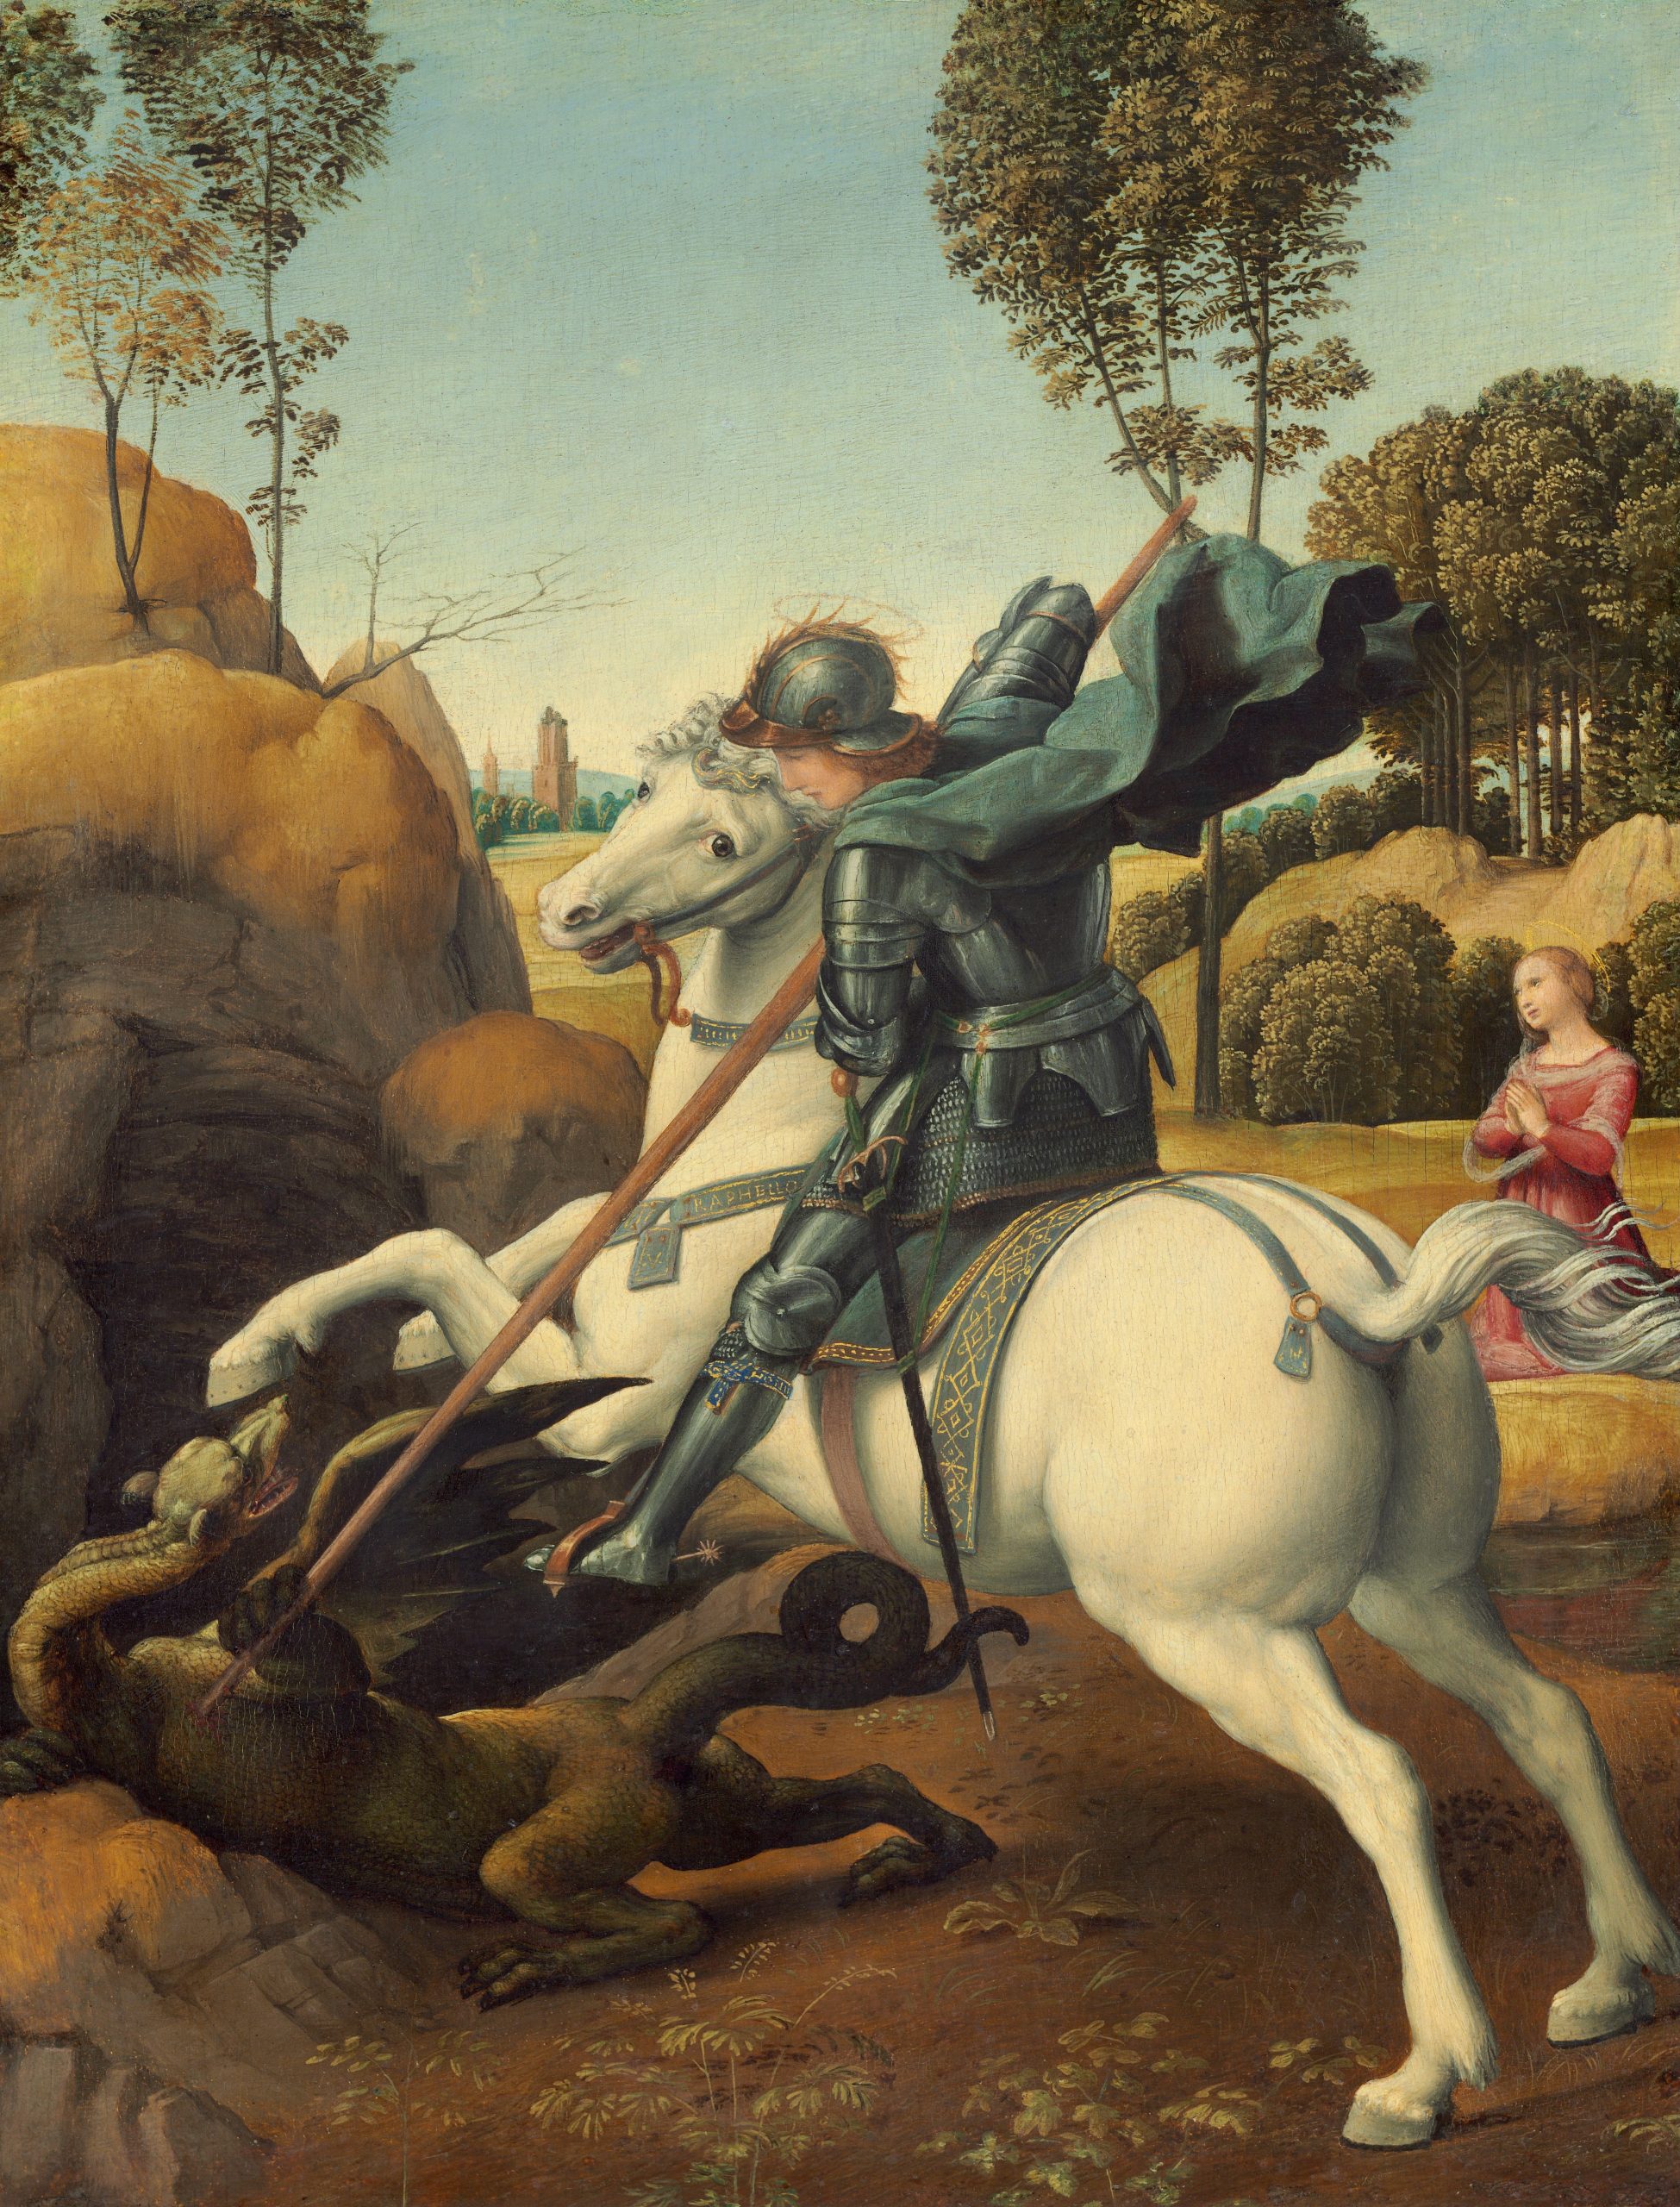 A man riding a white horse holds a weapon to strike a dragon while a woman in the background stares towards the scene.